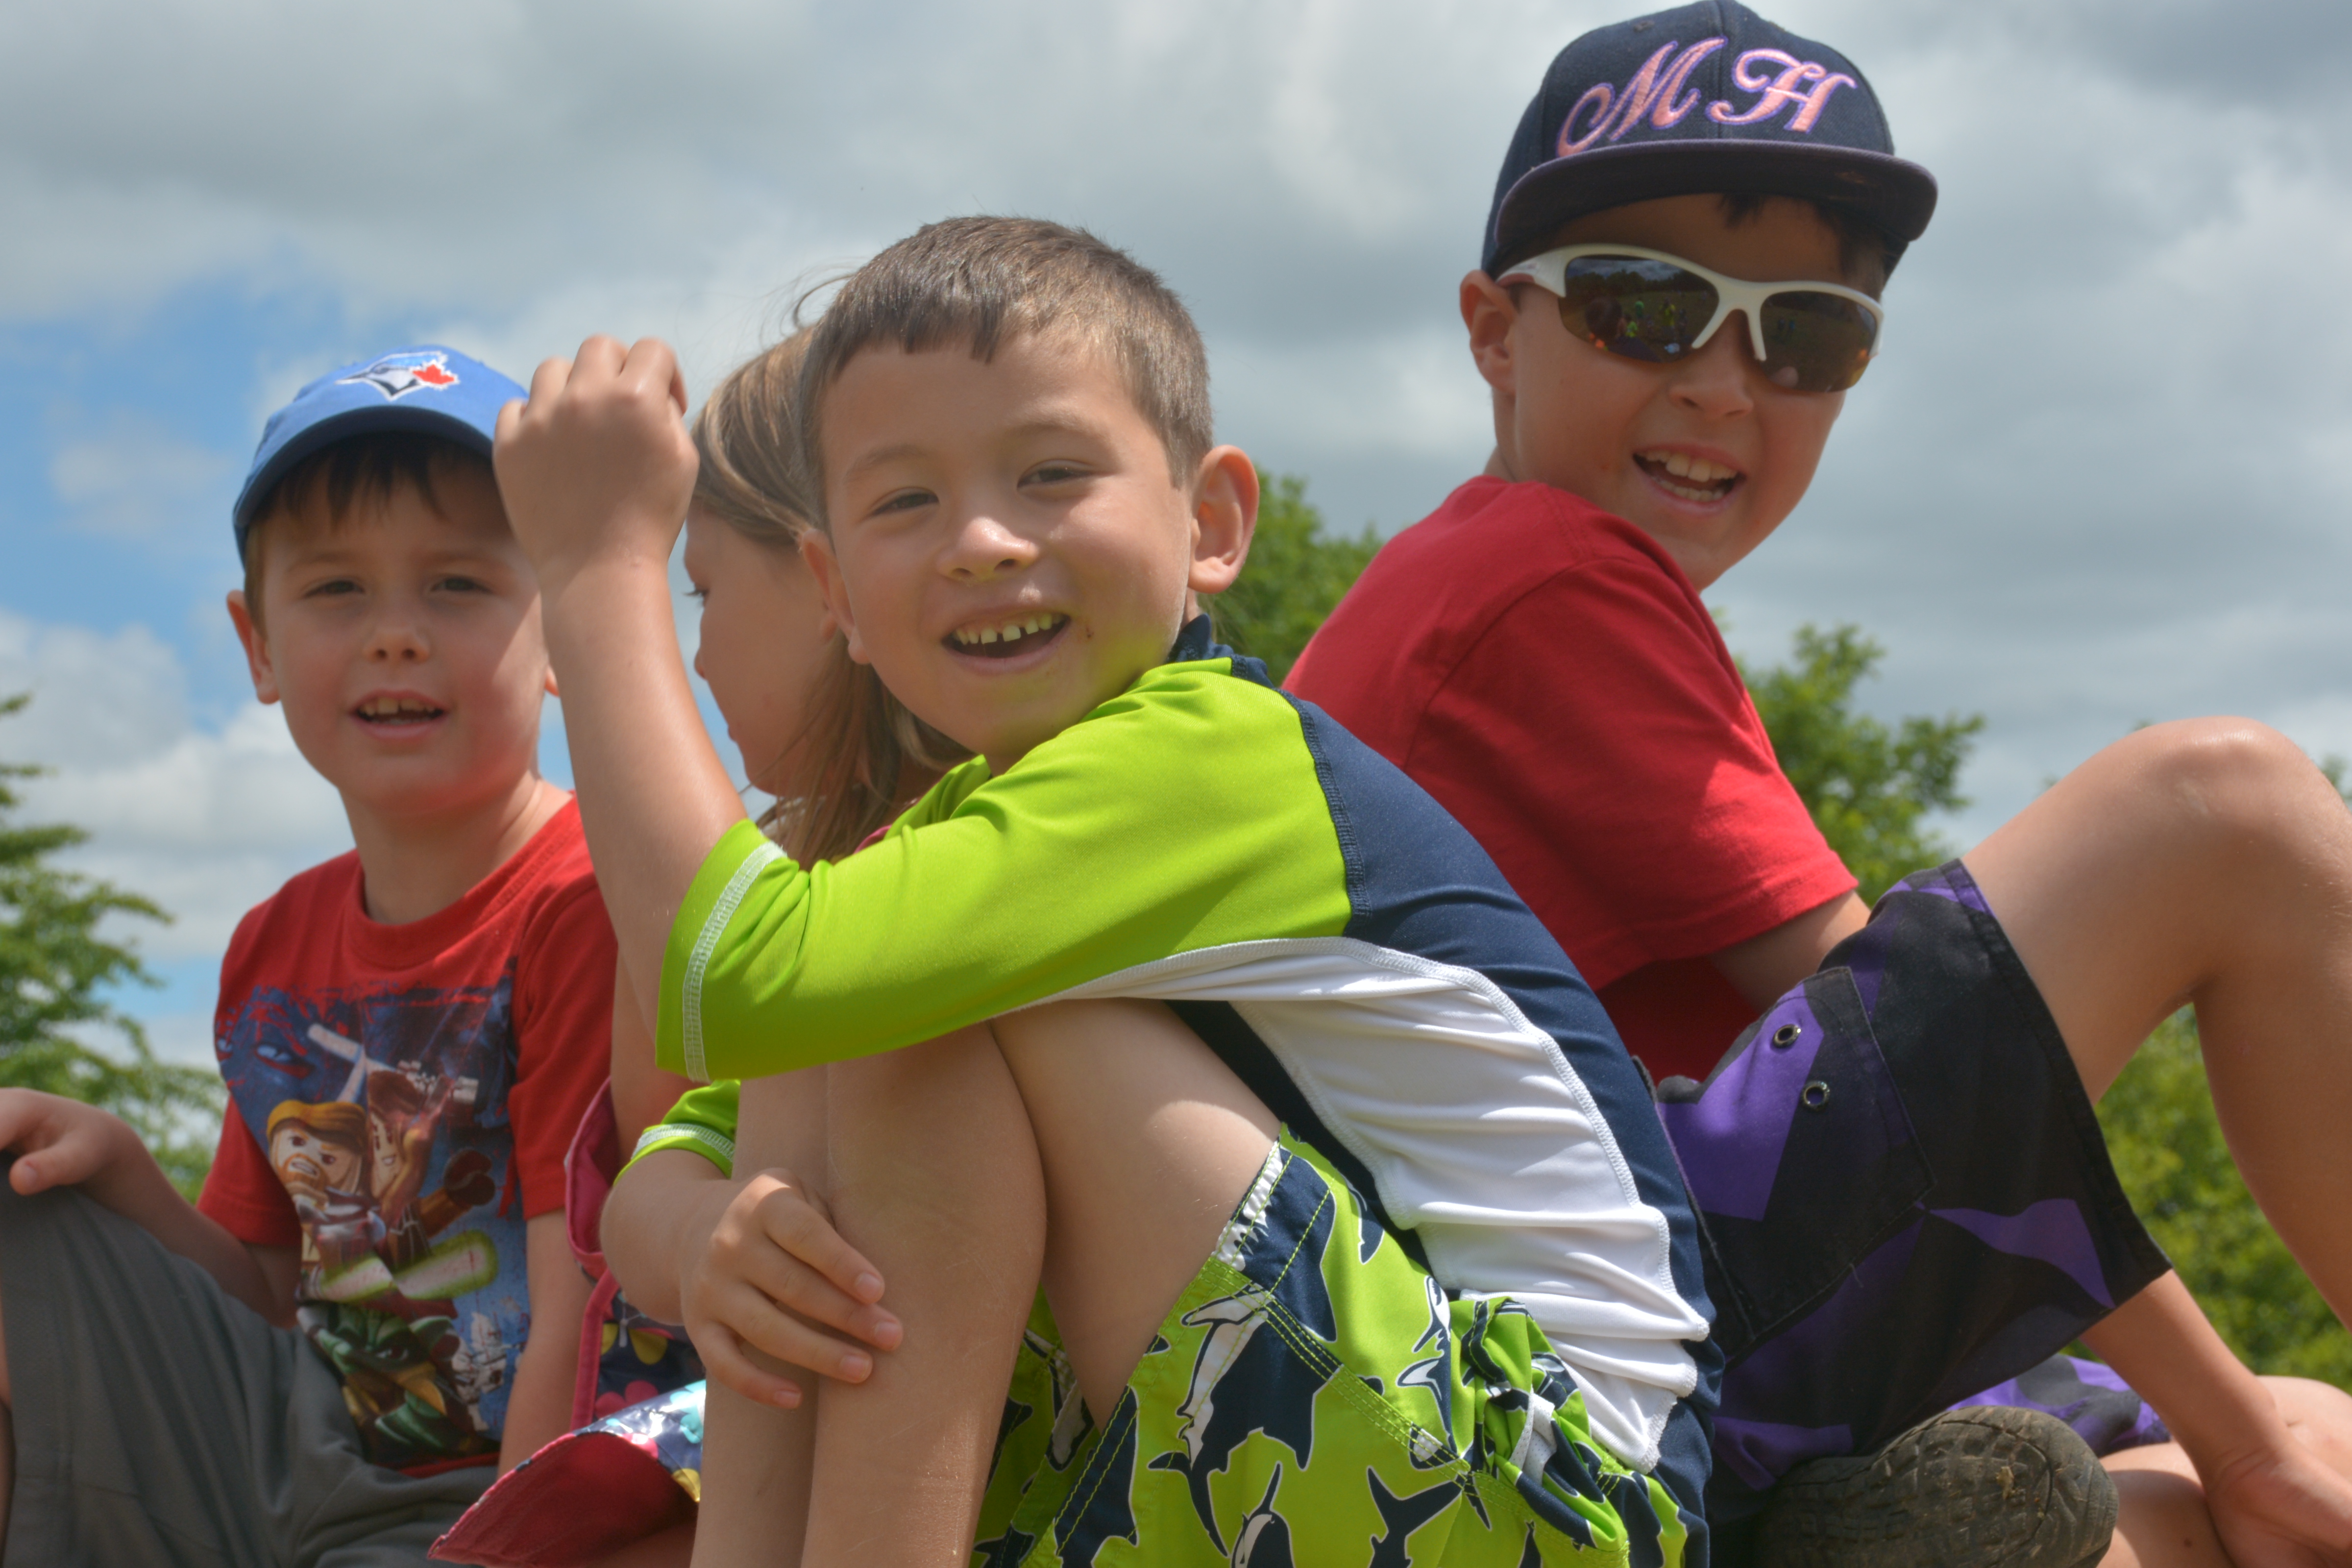 View the Camp Kahuna Photo Gallery of Kids at Summer Camp in Burlington